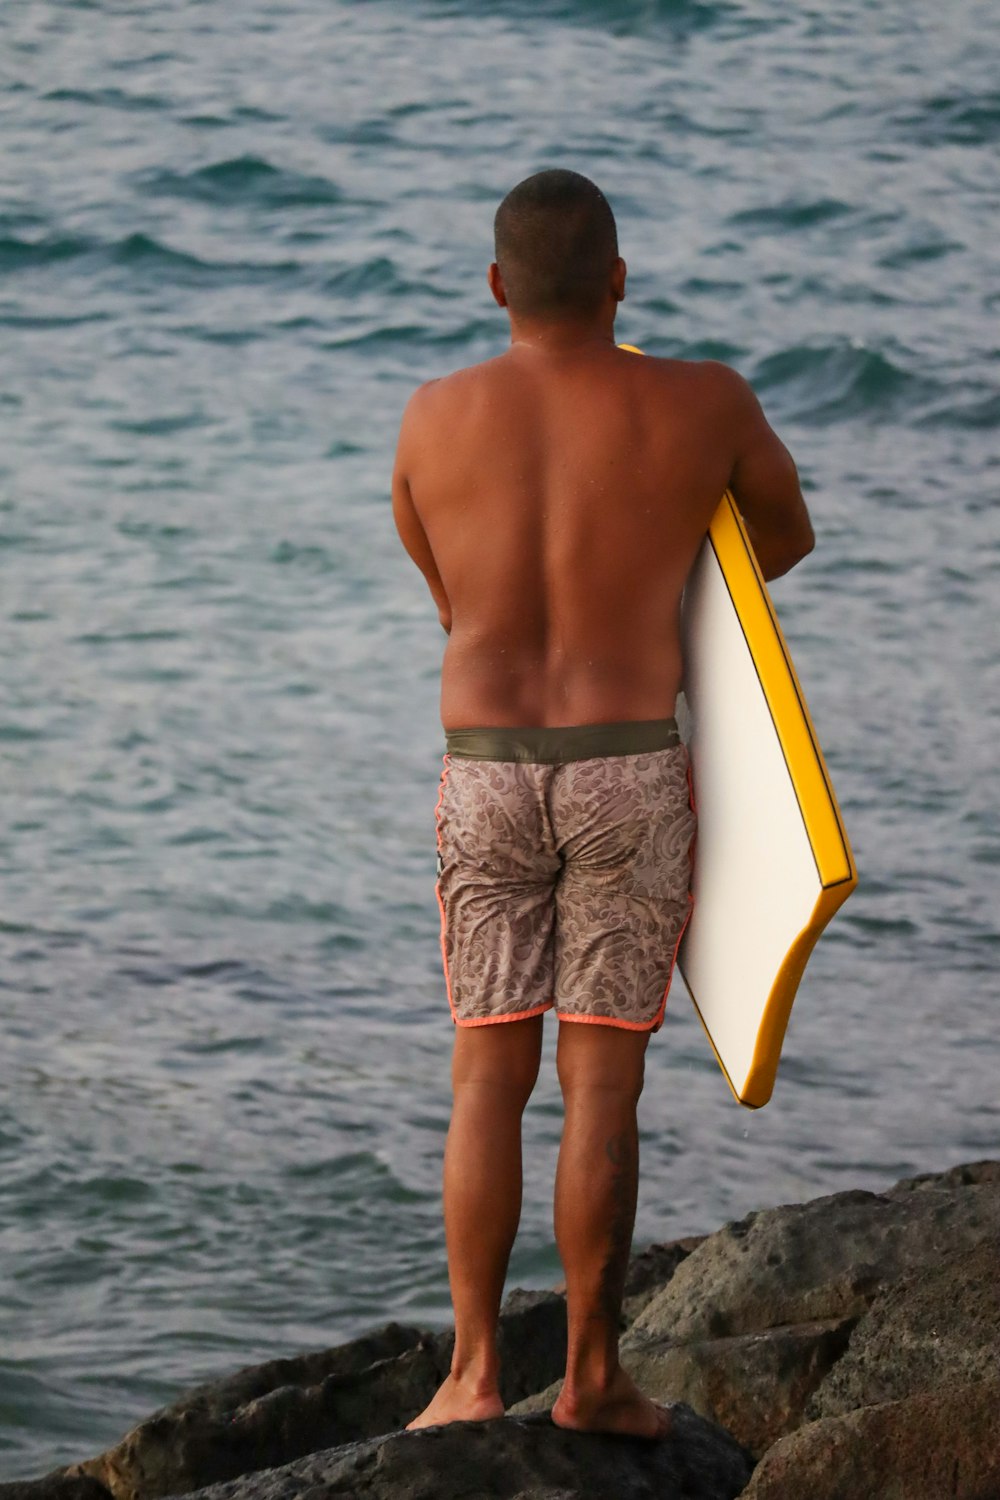 man in blue and white shorts holding white surfboard standing on beach during daytime